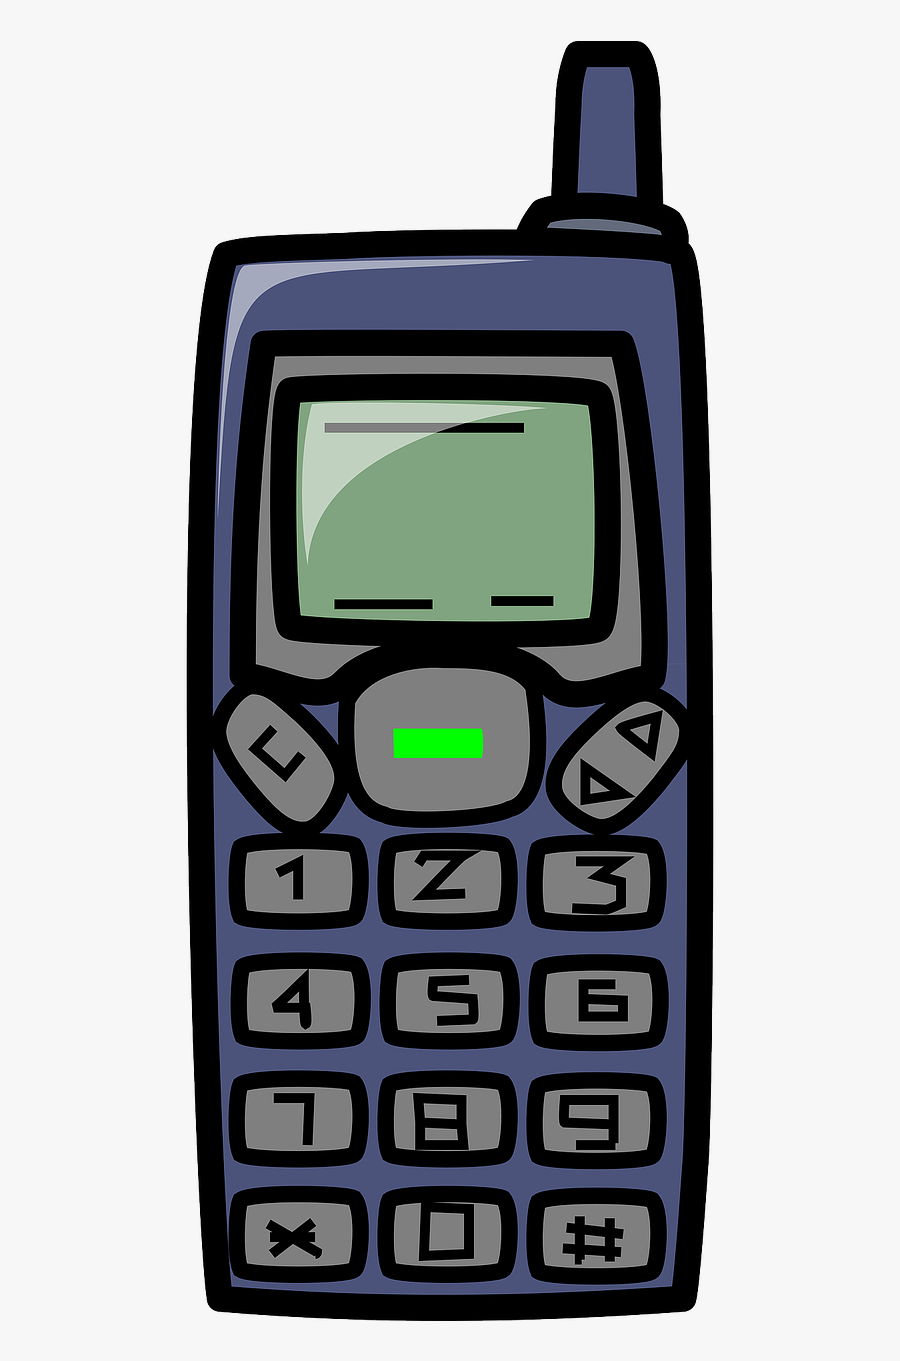 Cell Phone Free To Use Clipart - Old Mobile Phone Cartoon, Transparent Clipart